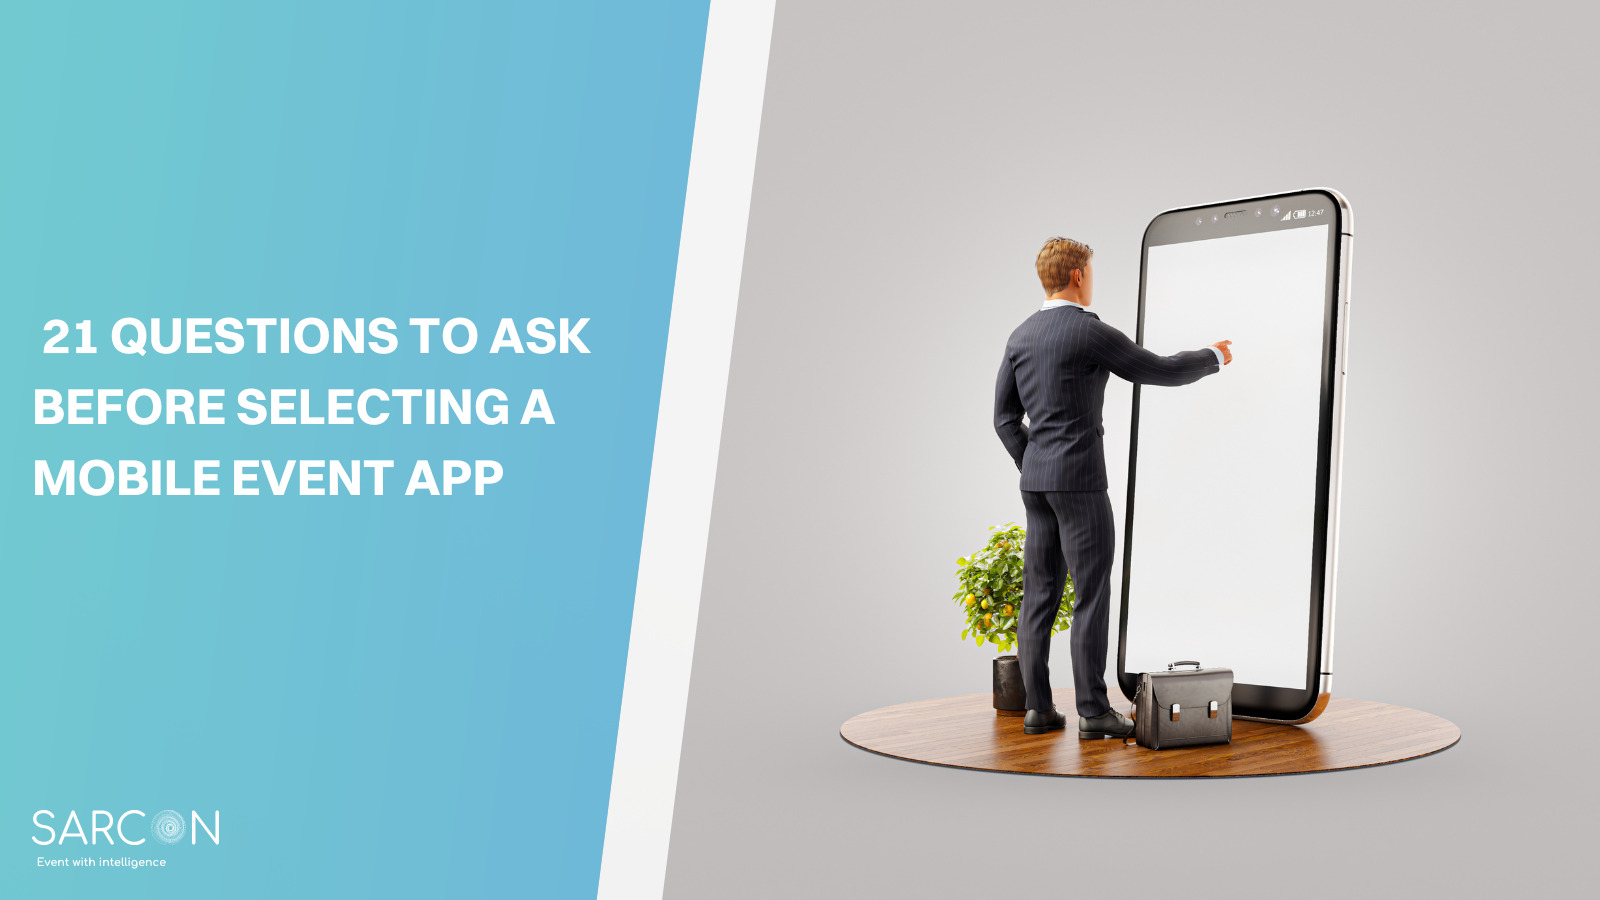 21 Questions to Ask Before Selecting a Mobile Event App